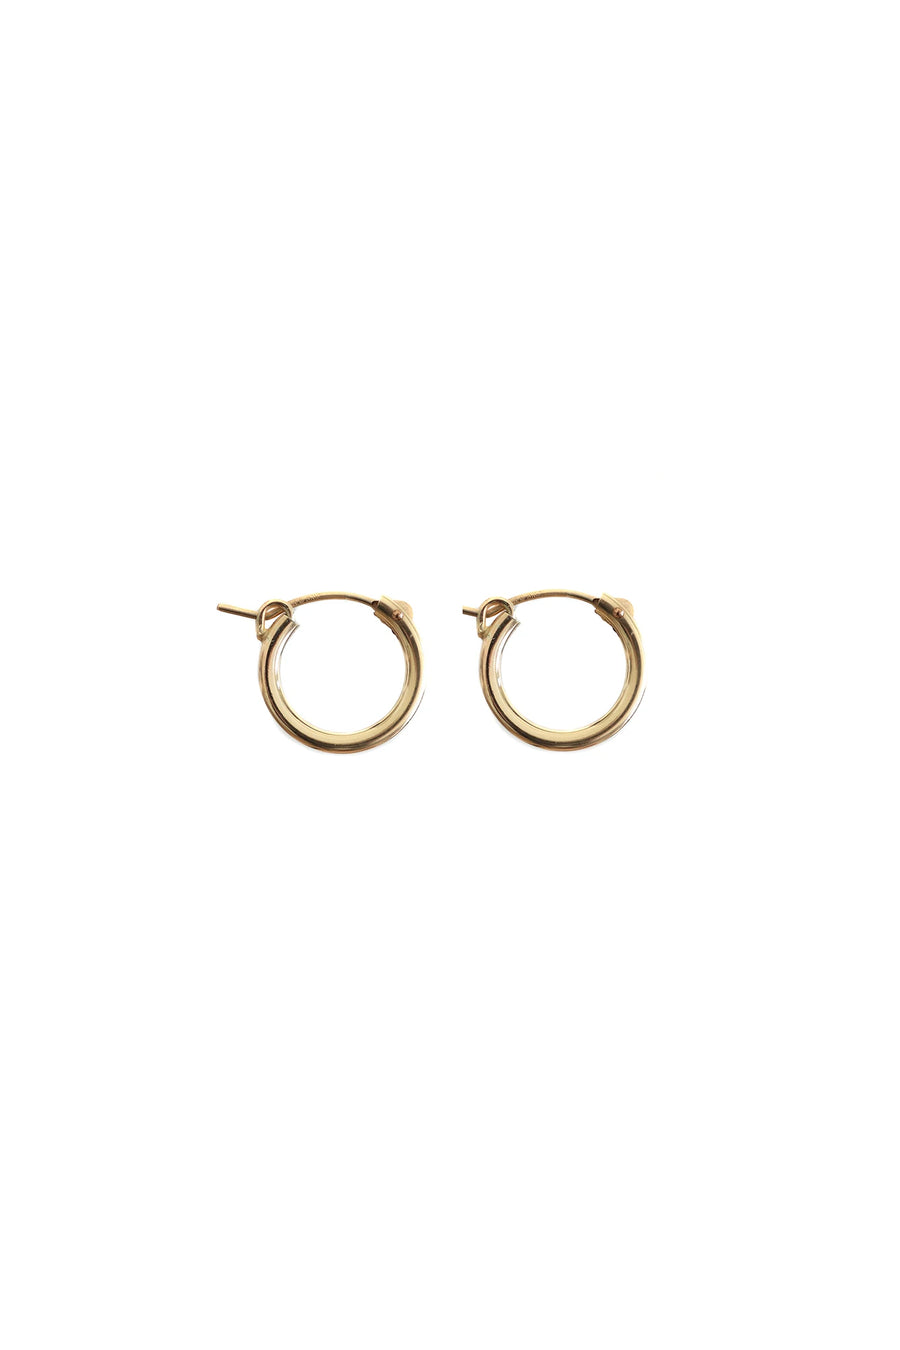 LISBETH JEWELRY - ROBBIE HOOPS - GOLD FILLED